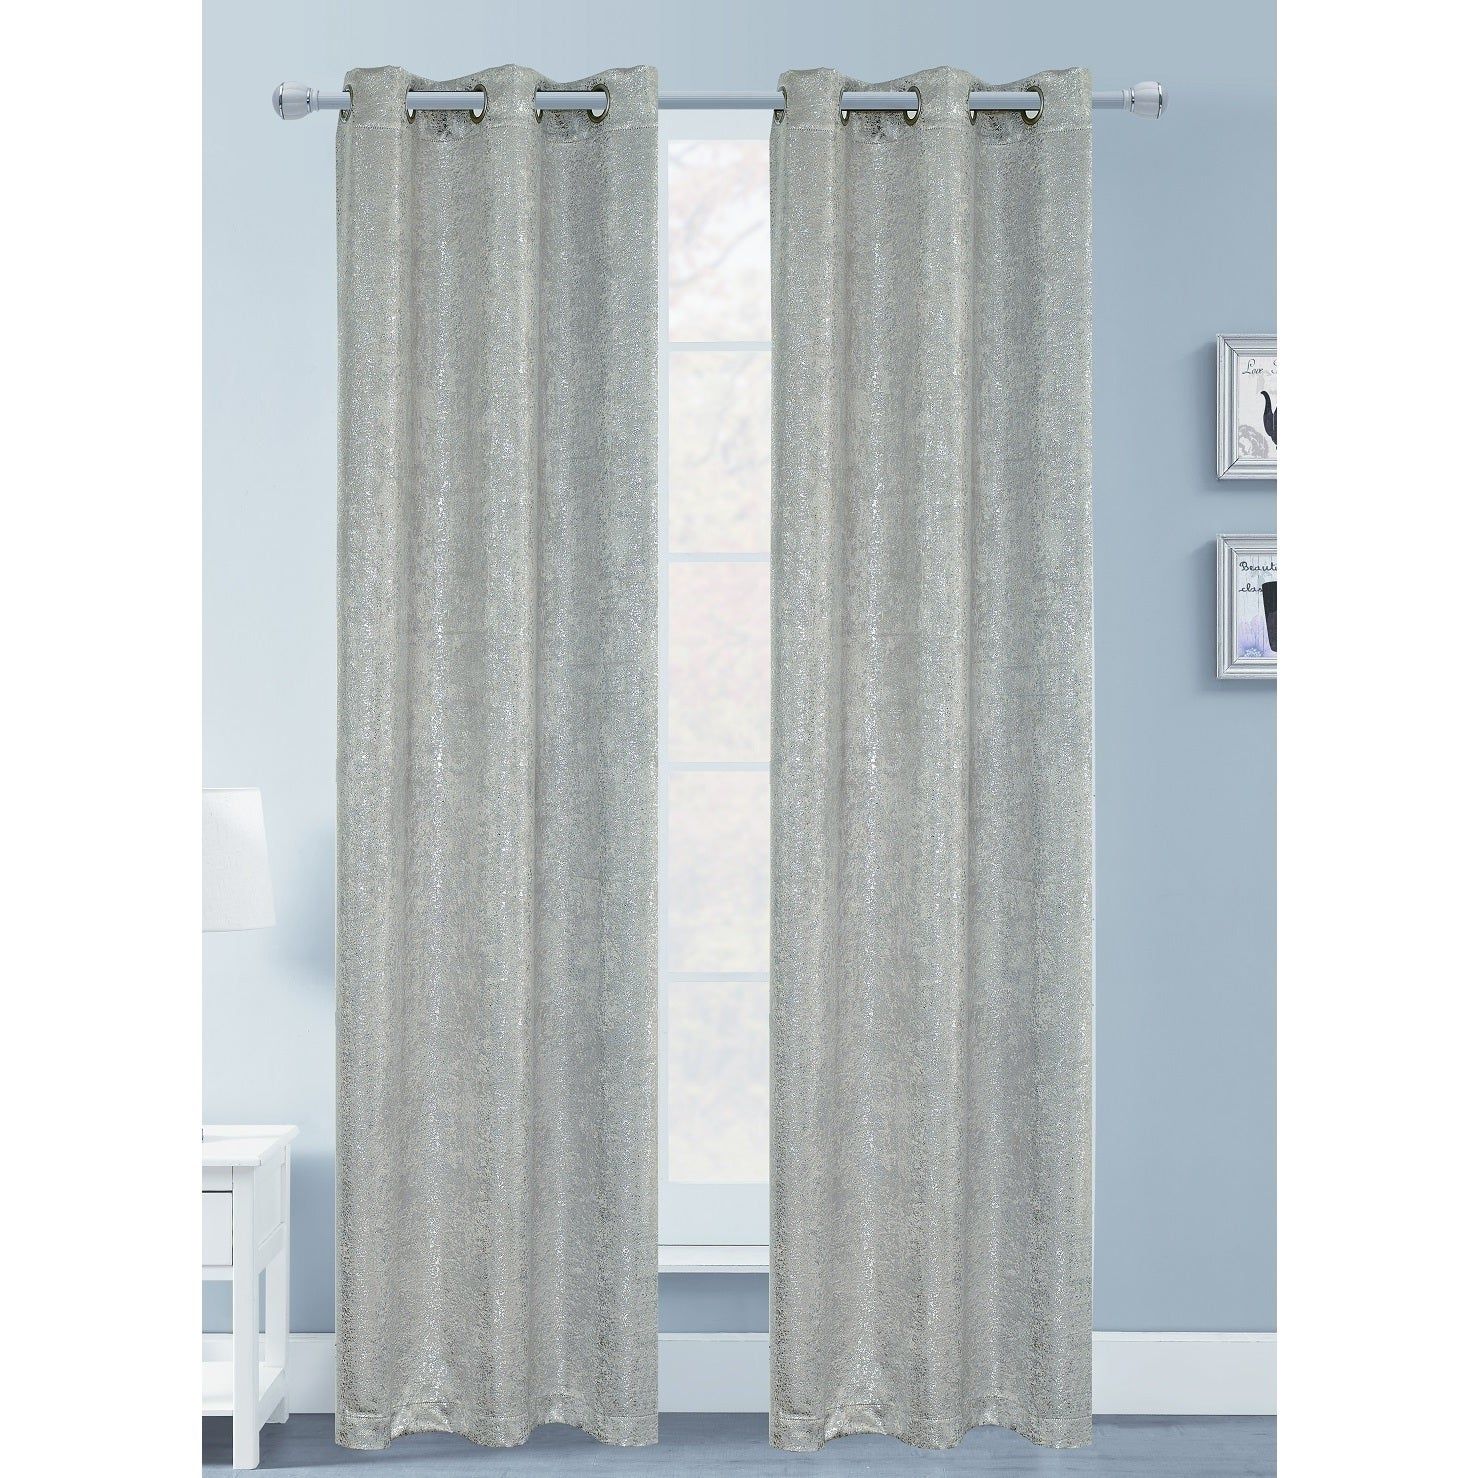 Artistic Silver Foil Blackout Curtain Panel Pair Pertaining To Gracewood Hollow Tucakovic Energy Efficient Fabric Blackout Curtains (View 10 of 20)